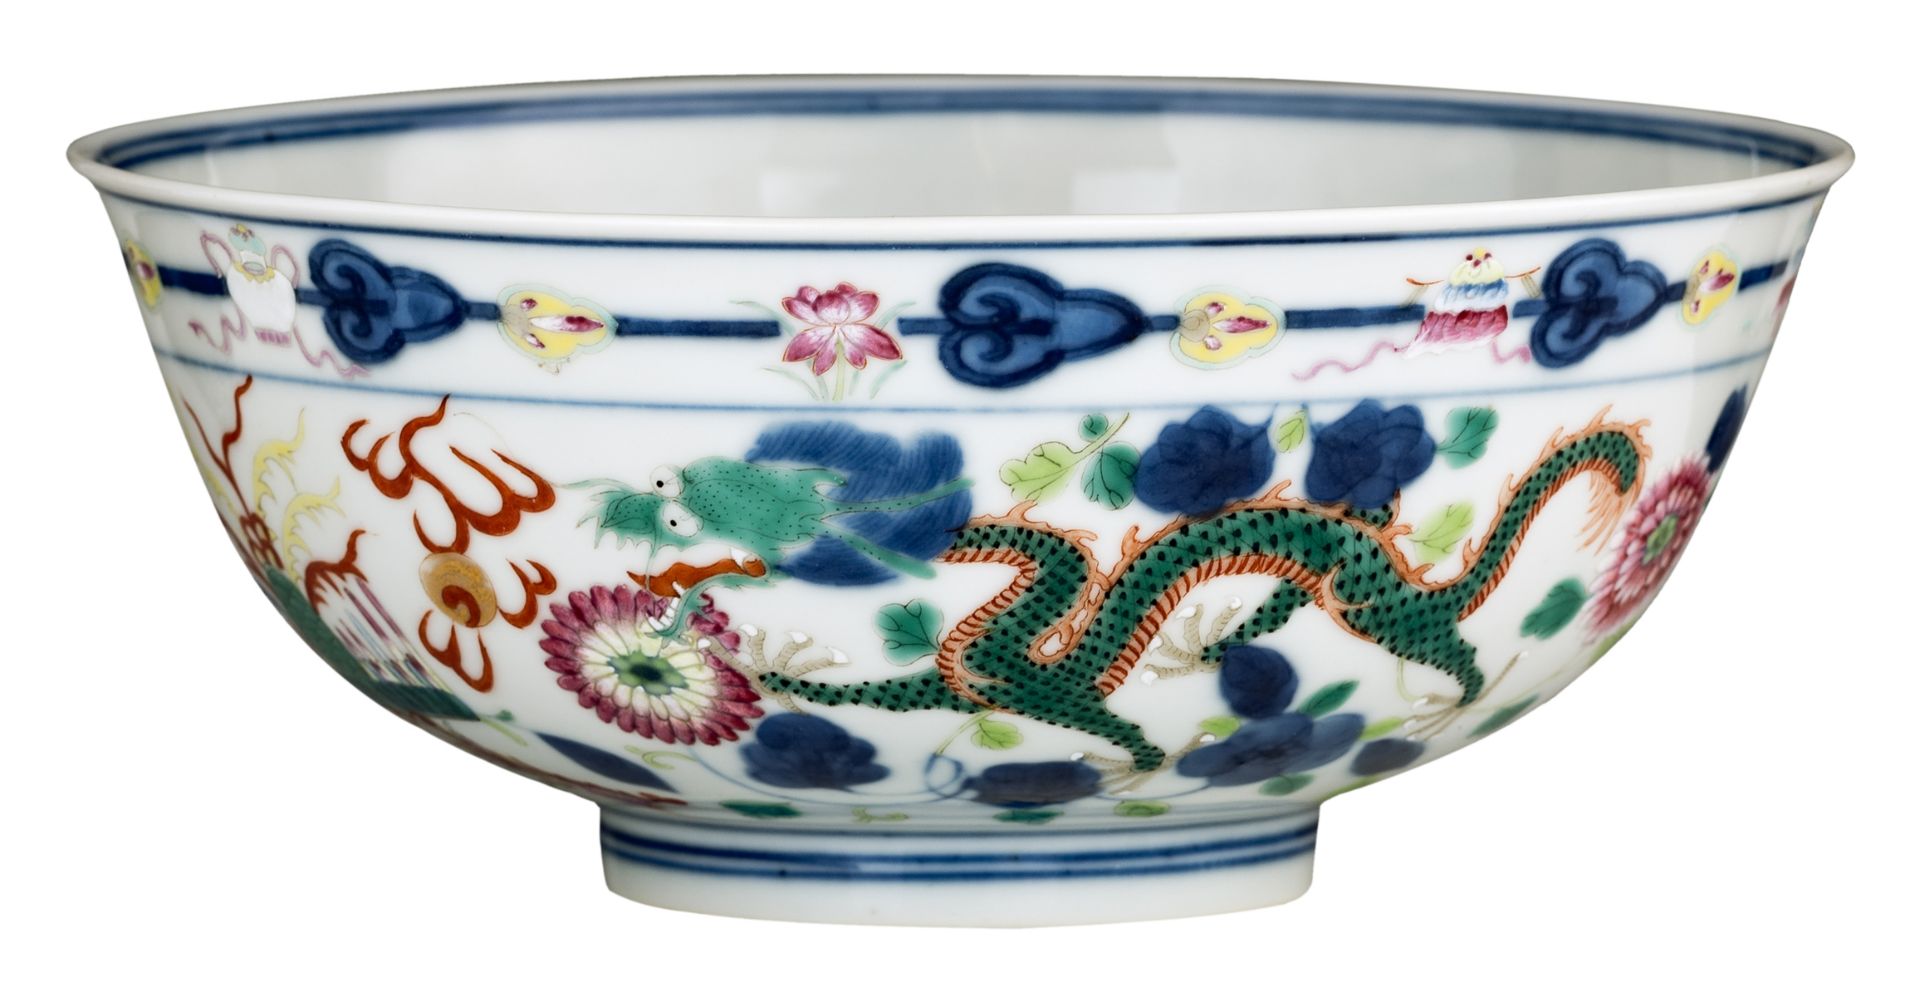 A Chinese polychrome bowl, decorated with flowers and dragons, chasing the flaming pearl, with a Ton